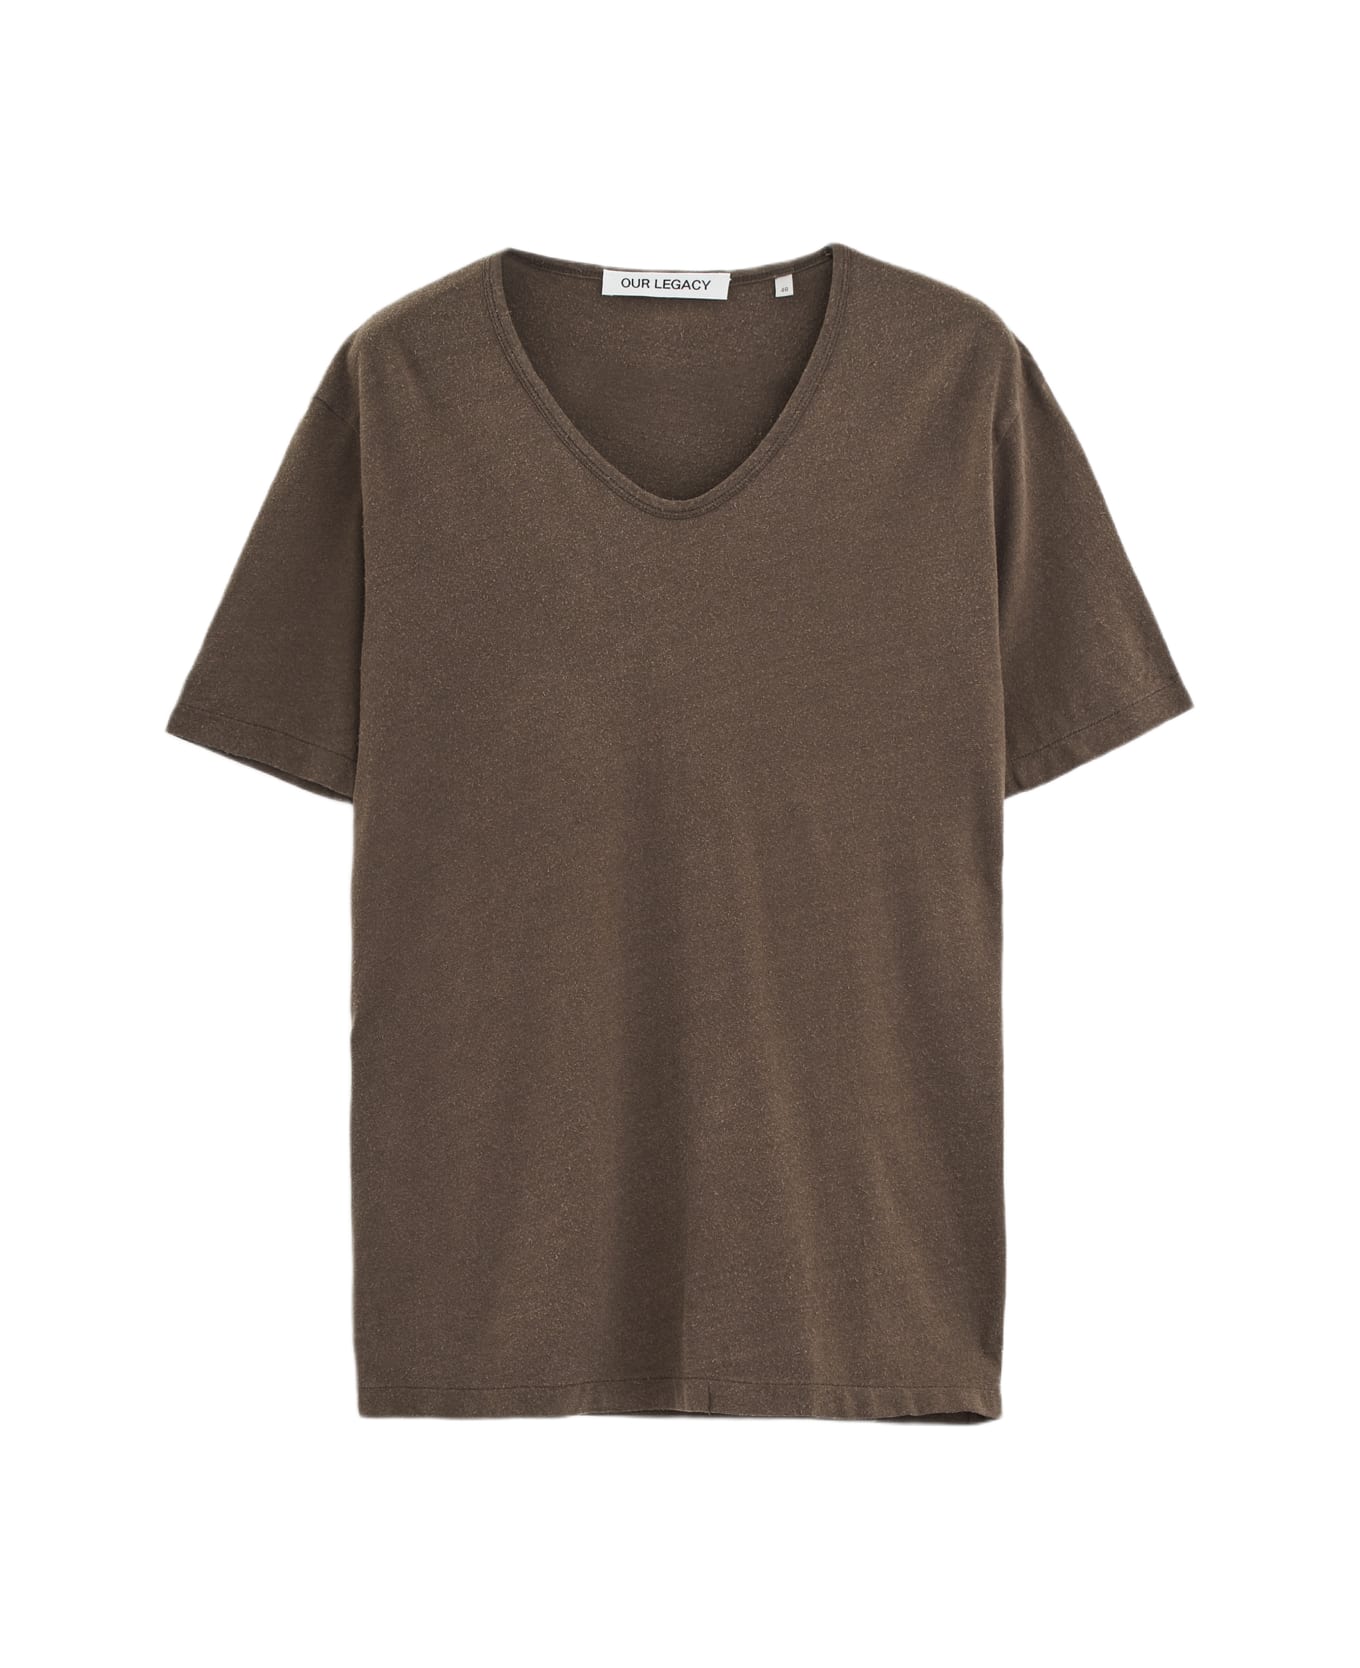 Our Legacy U-neck T-shirt - brown